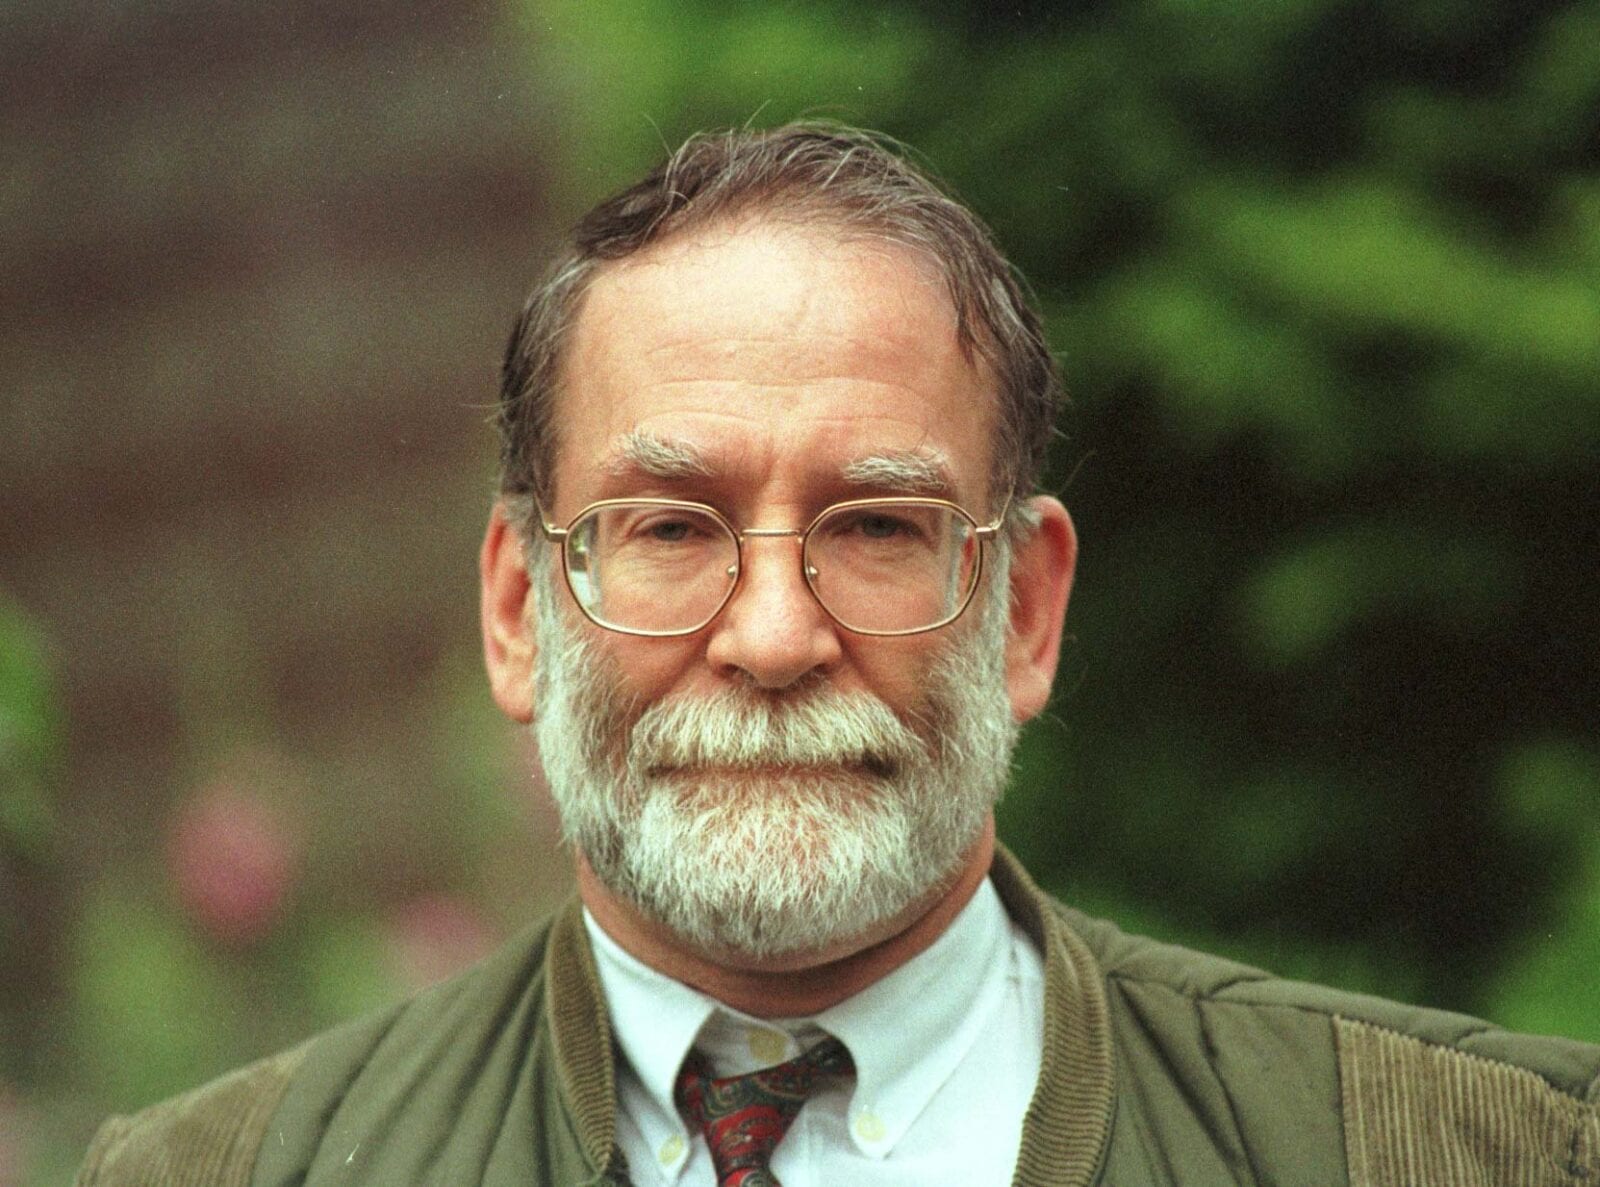 BBC documentary about infamous Manchester serial killer Harold Shipman airs tonight, The Manc